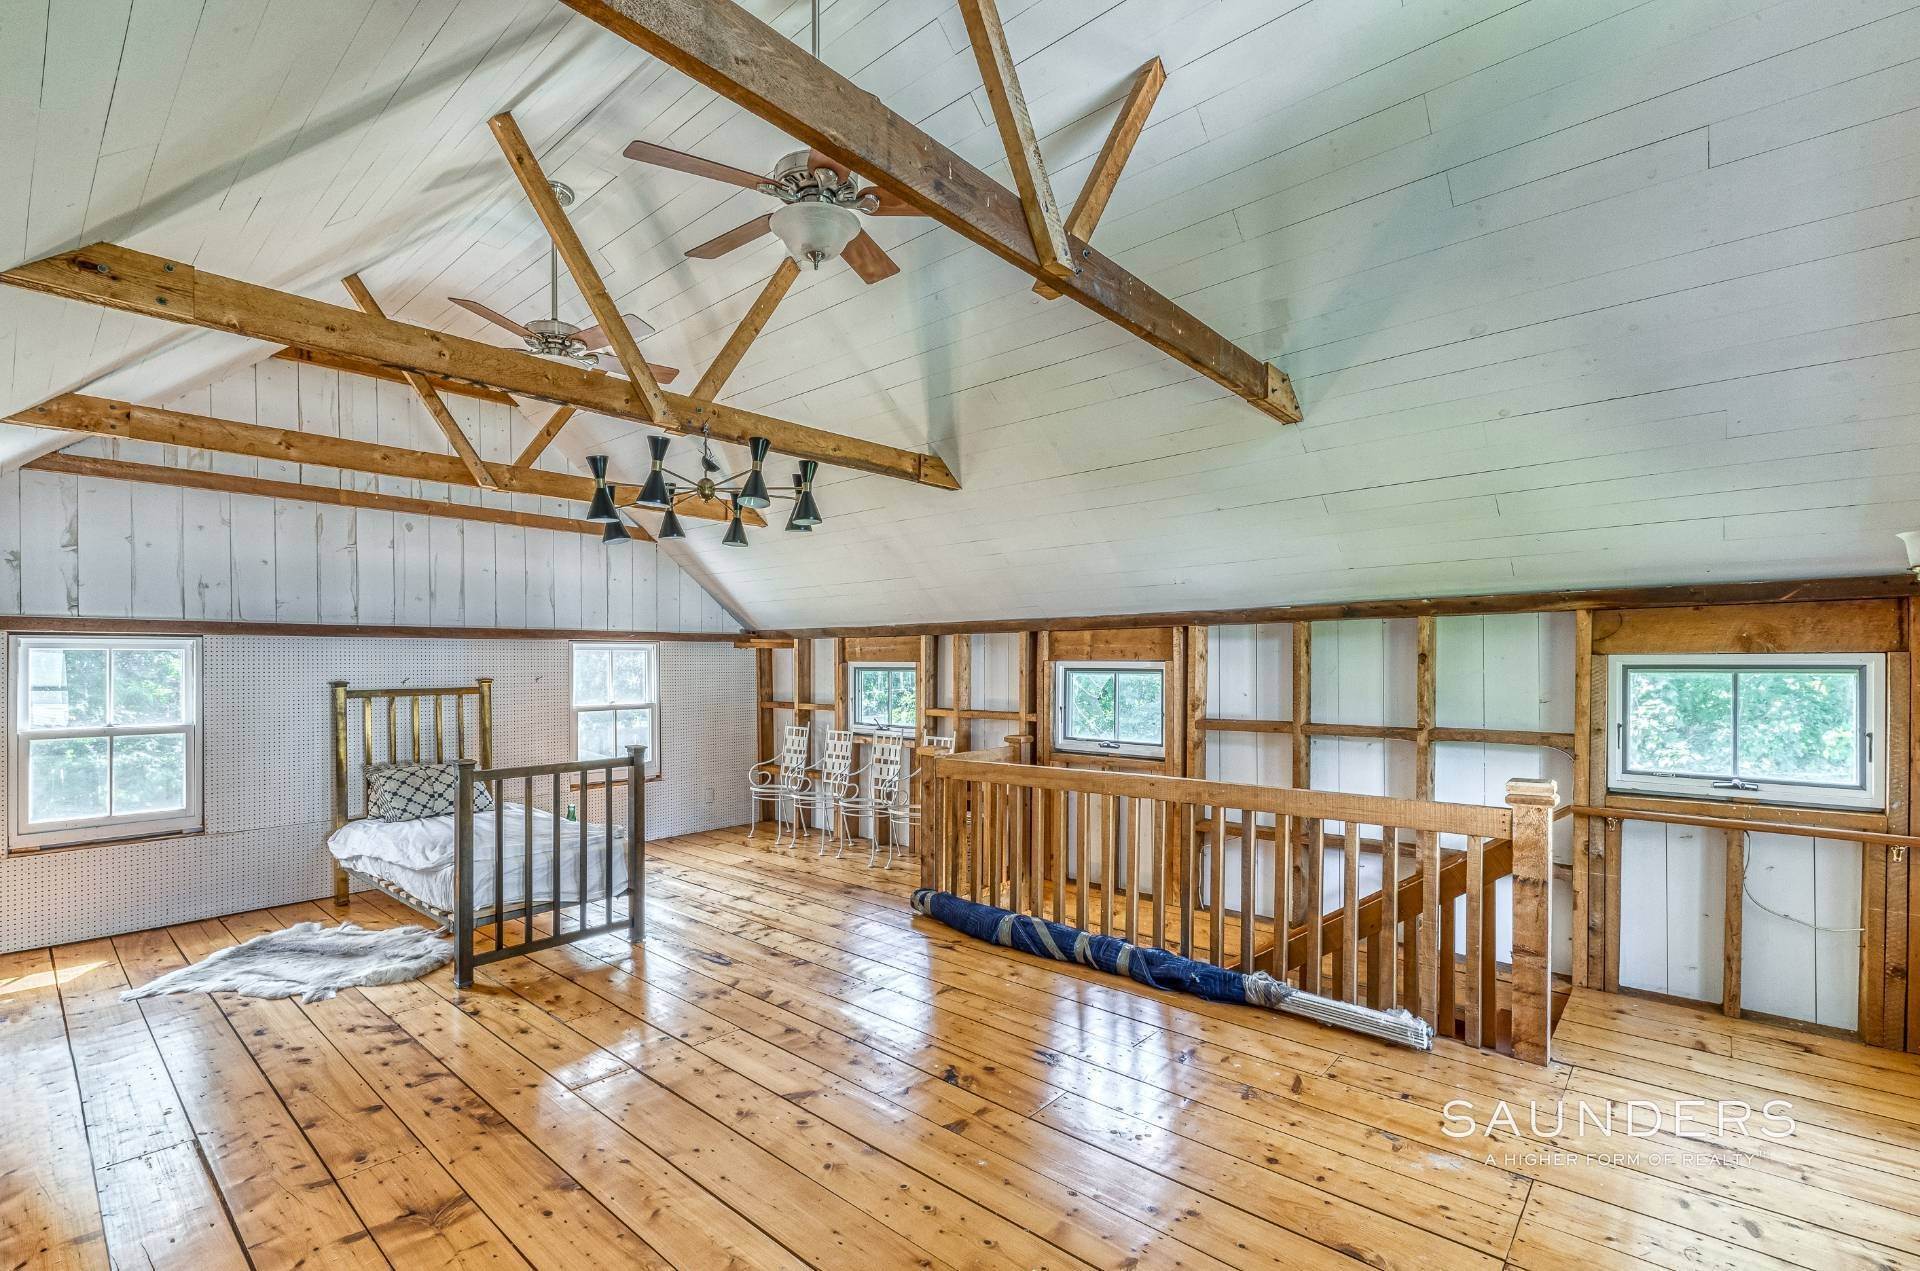 48. Single Family Homes for Sale at Shelter Island Restored 1900 Farmhouse With Barn 9 Sunshine Road, Shelter Island, NY 11964